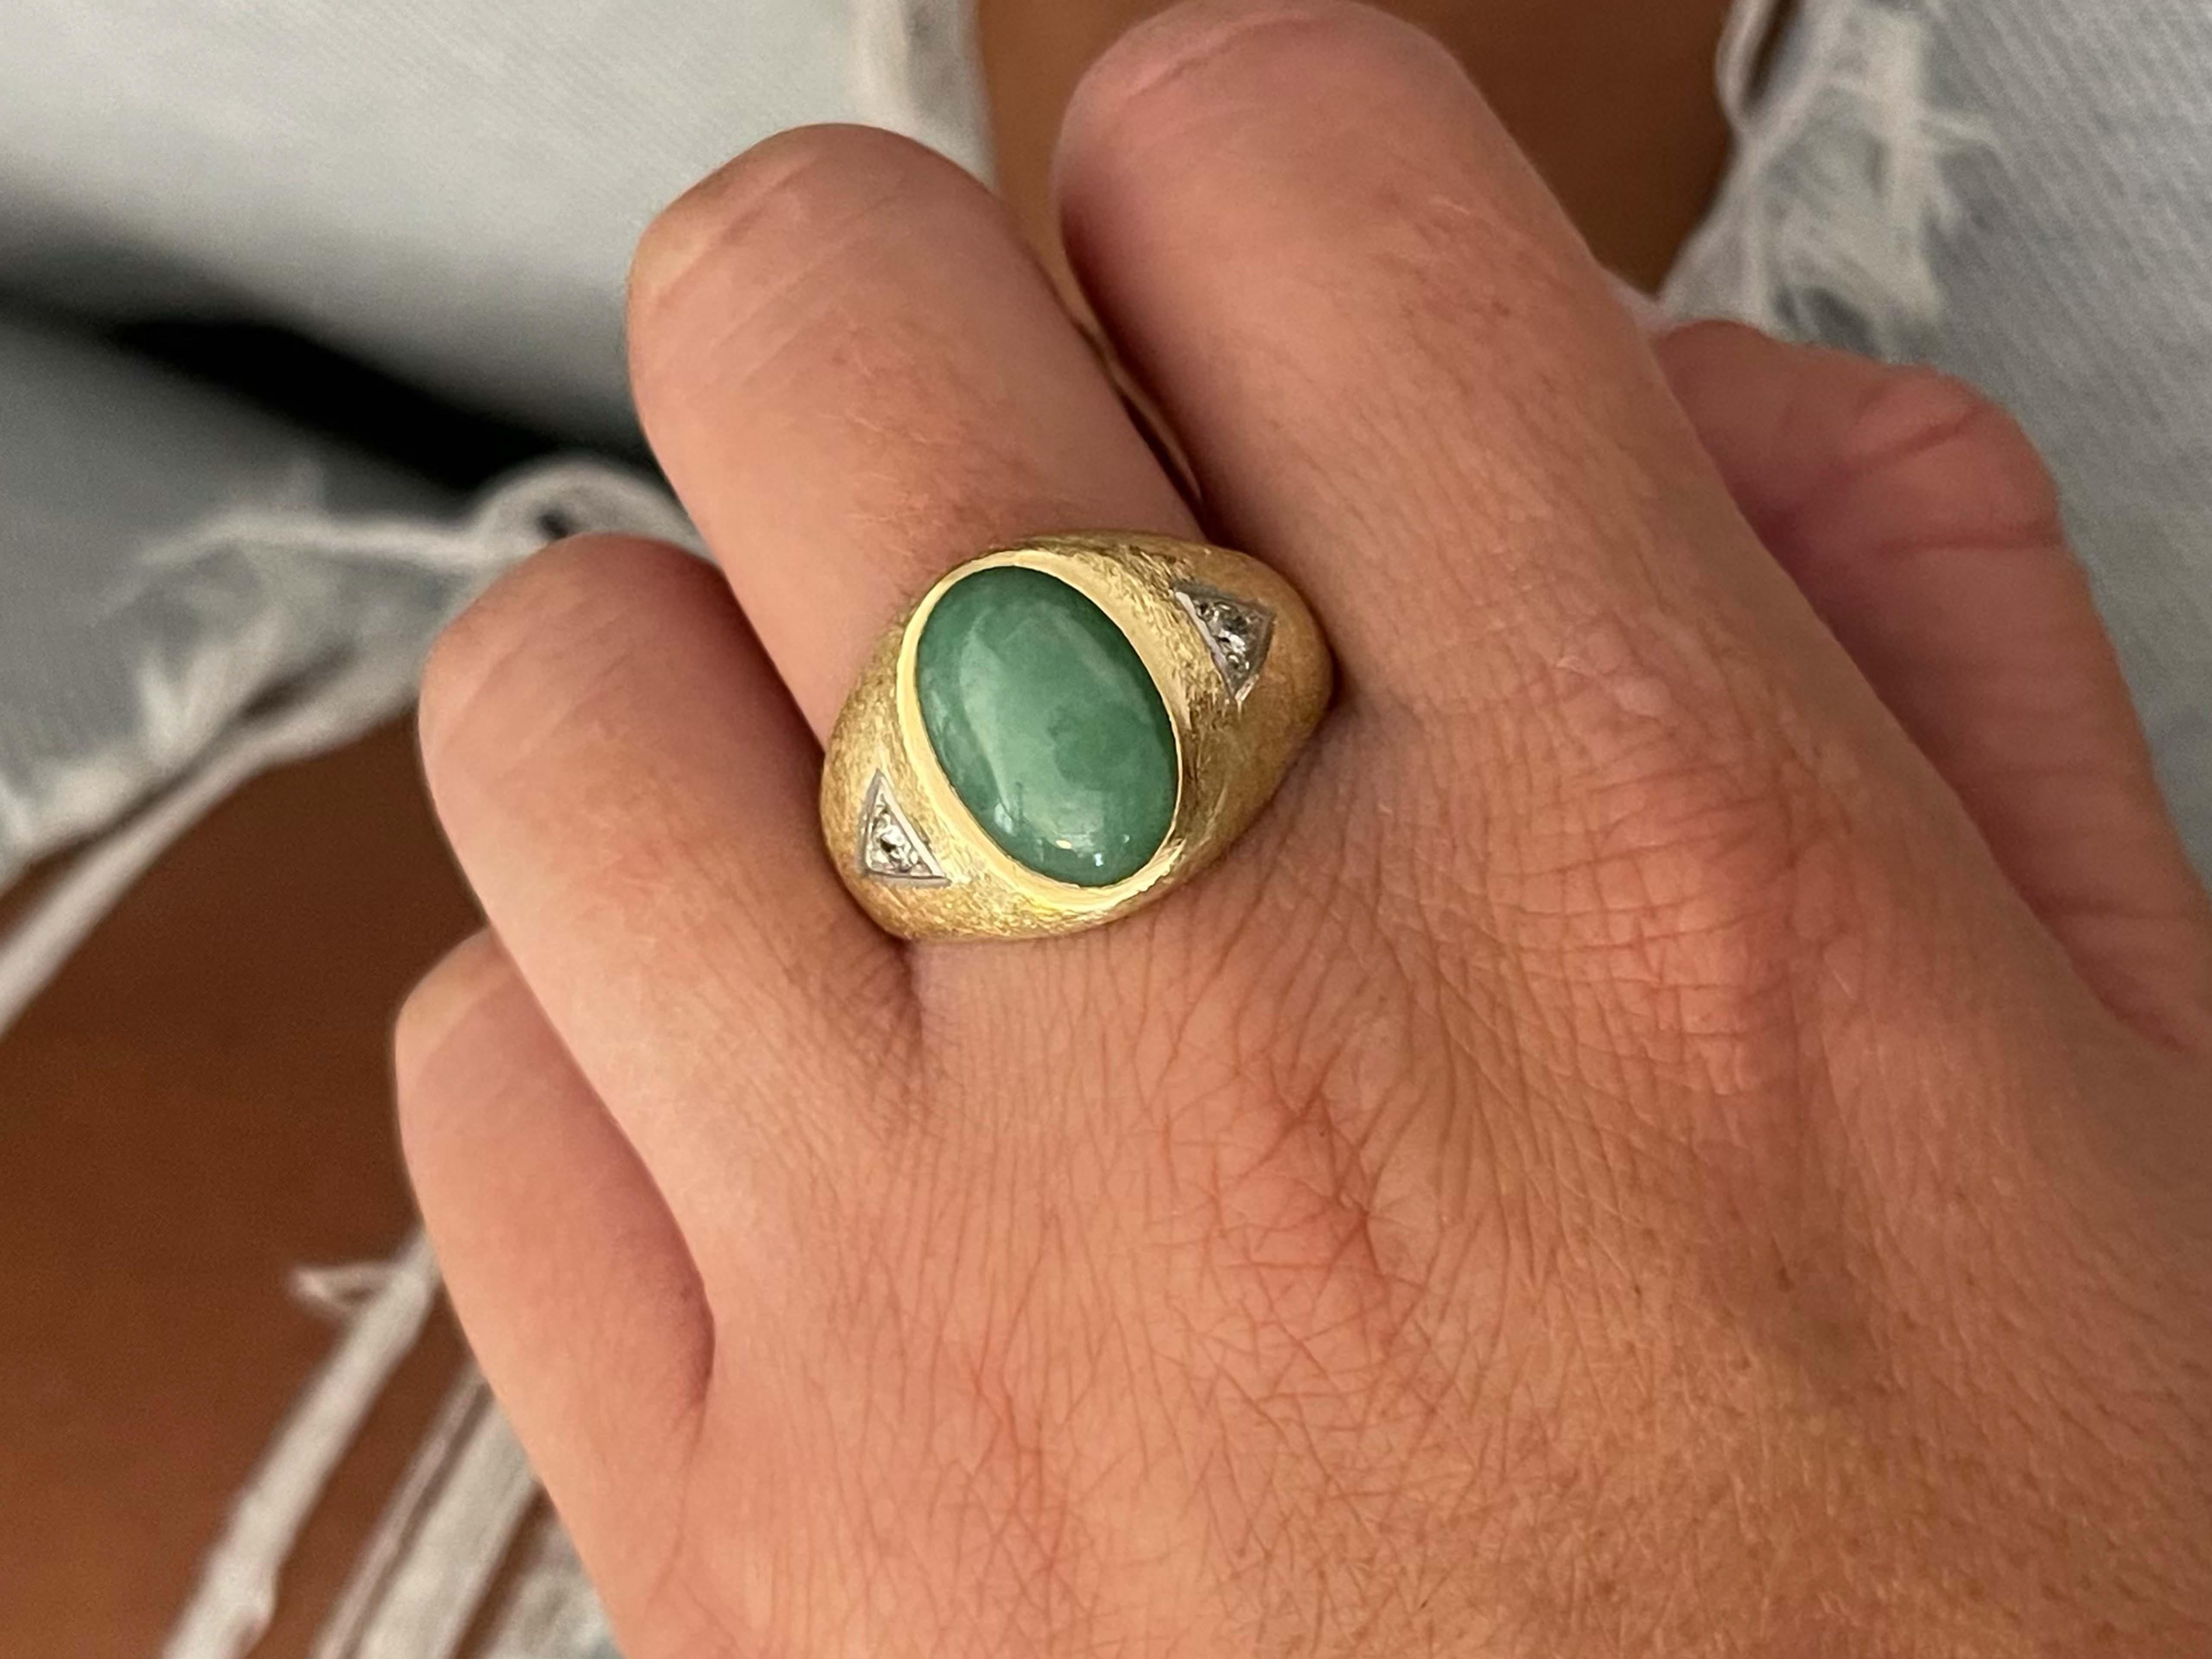 Item Specifications:

Metal: 14k Yellow Gold 

Style: Statement Ring

Ring Size: 12 (resizing available for a fee)

Total Weight: 10 Grams

Gemstone Specifications:

Center Gemstone: Jadeite Jade

Shape: Oval

Color: Green

Cut: Cabochon 

Jade